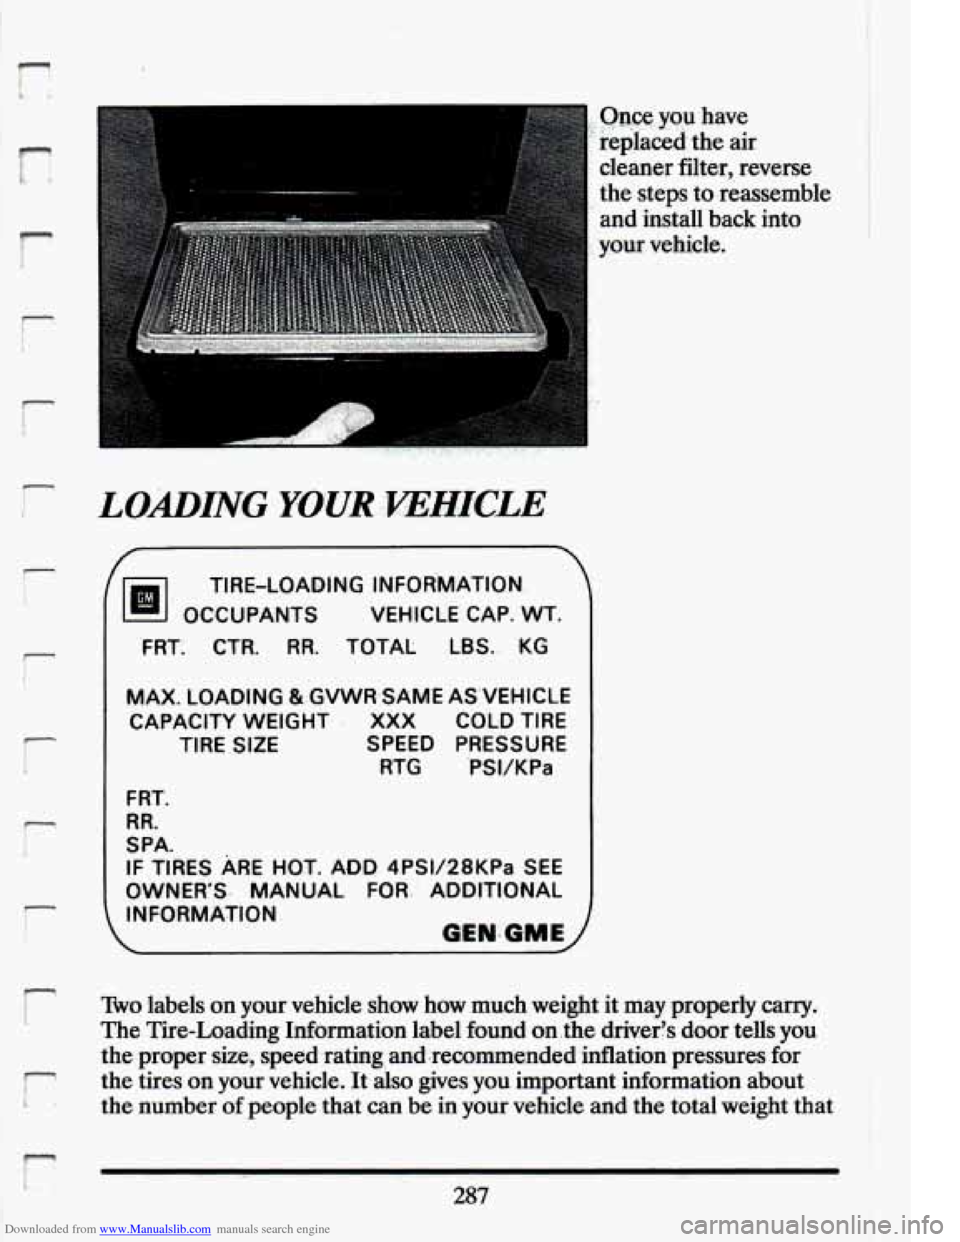 CADILLAC ELDORADO 1994 10.G Owners Manual Downloaded from www.Manualslib.com manuals search engine r 
r 1 
r 
t T 
r 
r 
n 
r 
, Once you  have 
replaced-the  air 
cleaner  filter,  reverse 
the  steps to-reassemble. 
and  install  back  into